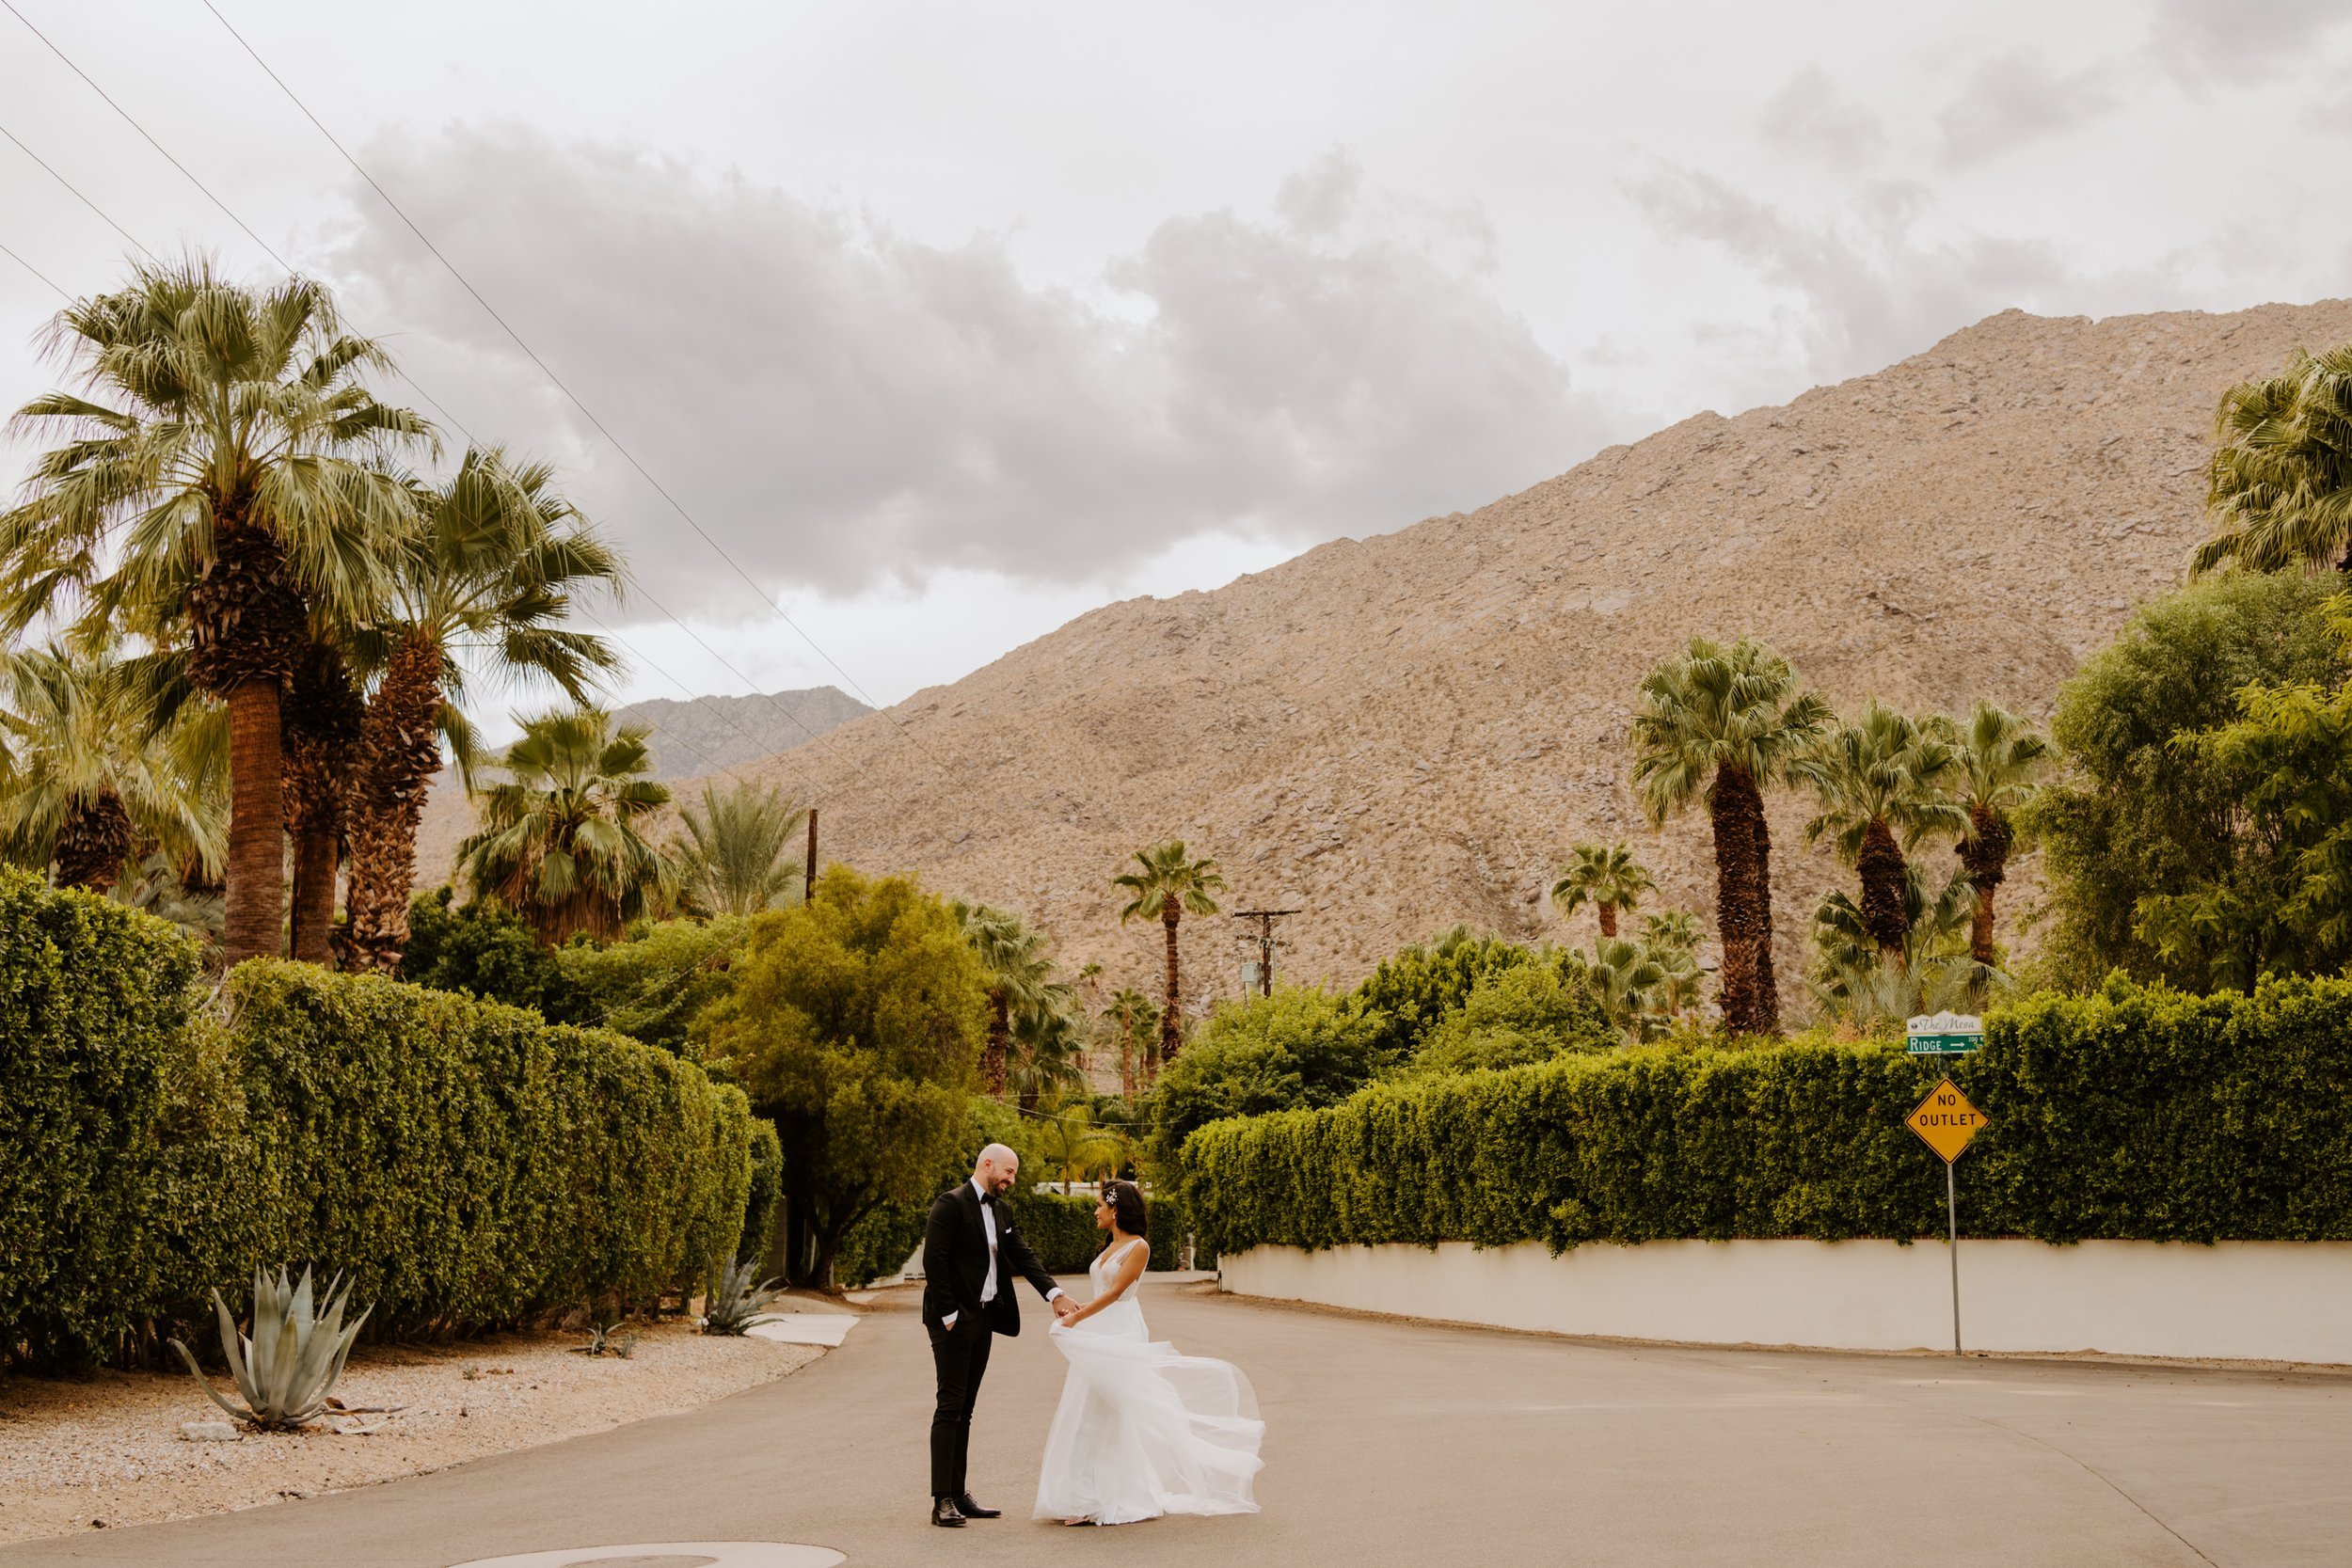 Bride and groom Palm Springs desert wedding photo, Photo by Tida Svy, Palm Springs Elopement Photographer